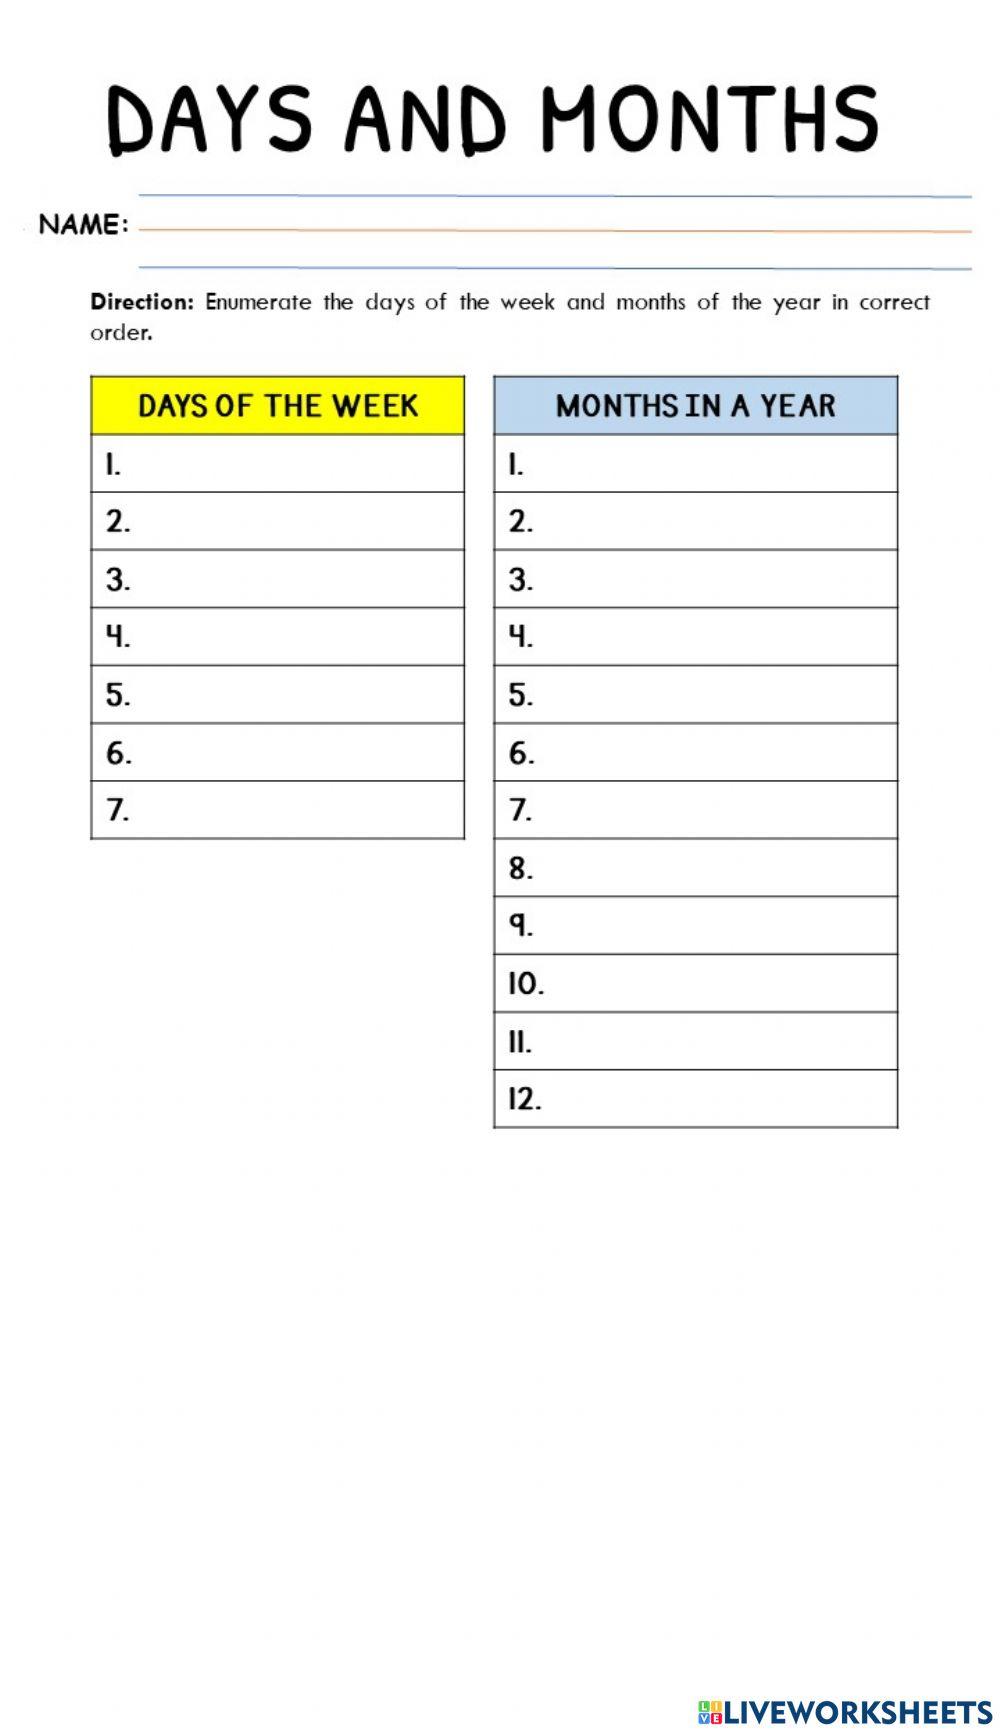 A5-Q4W6-Lesson 24 - Days of the Week and Months of the Year-ACTIVITIES